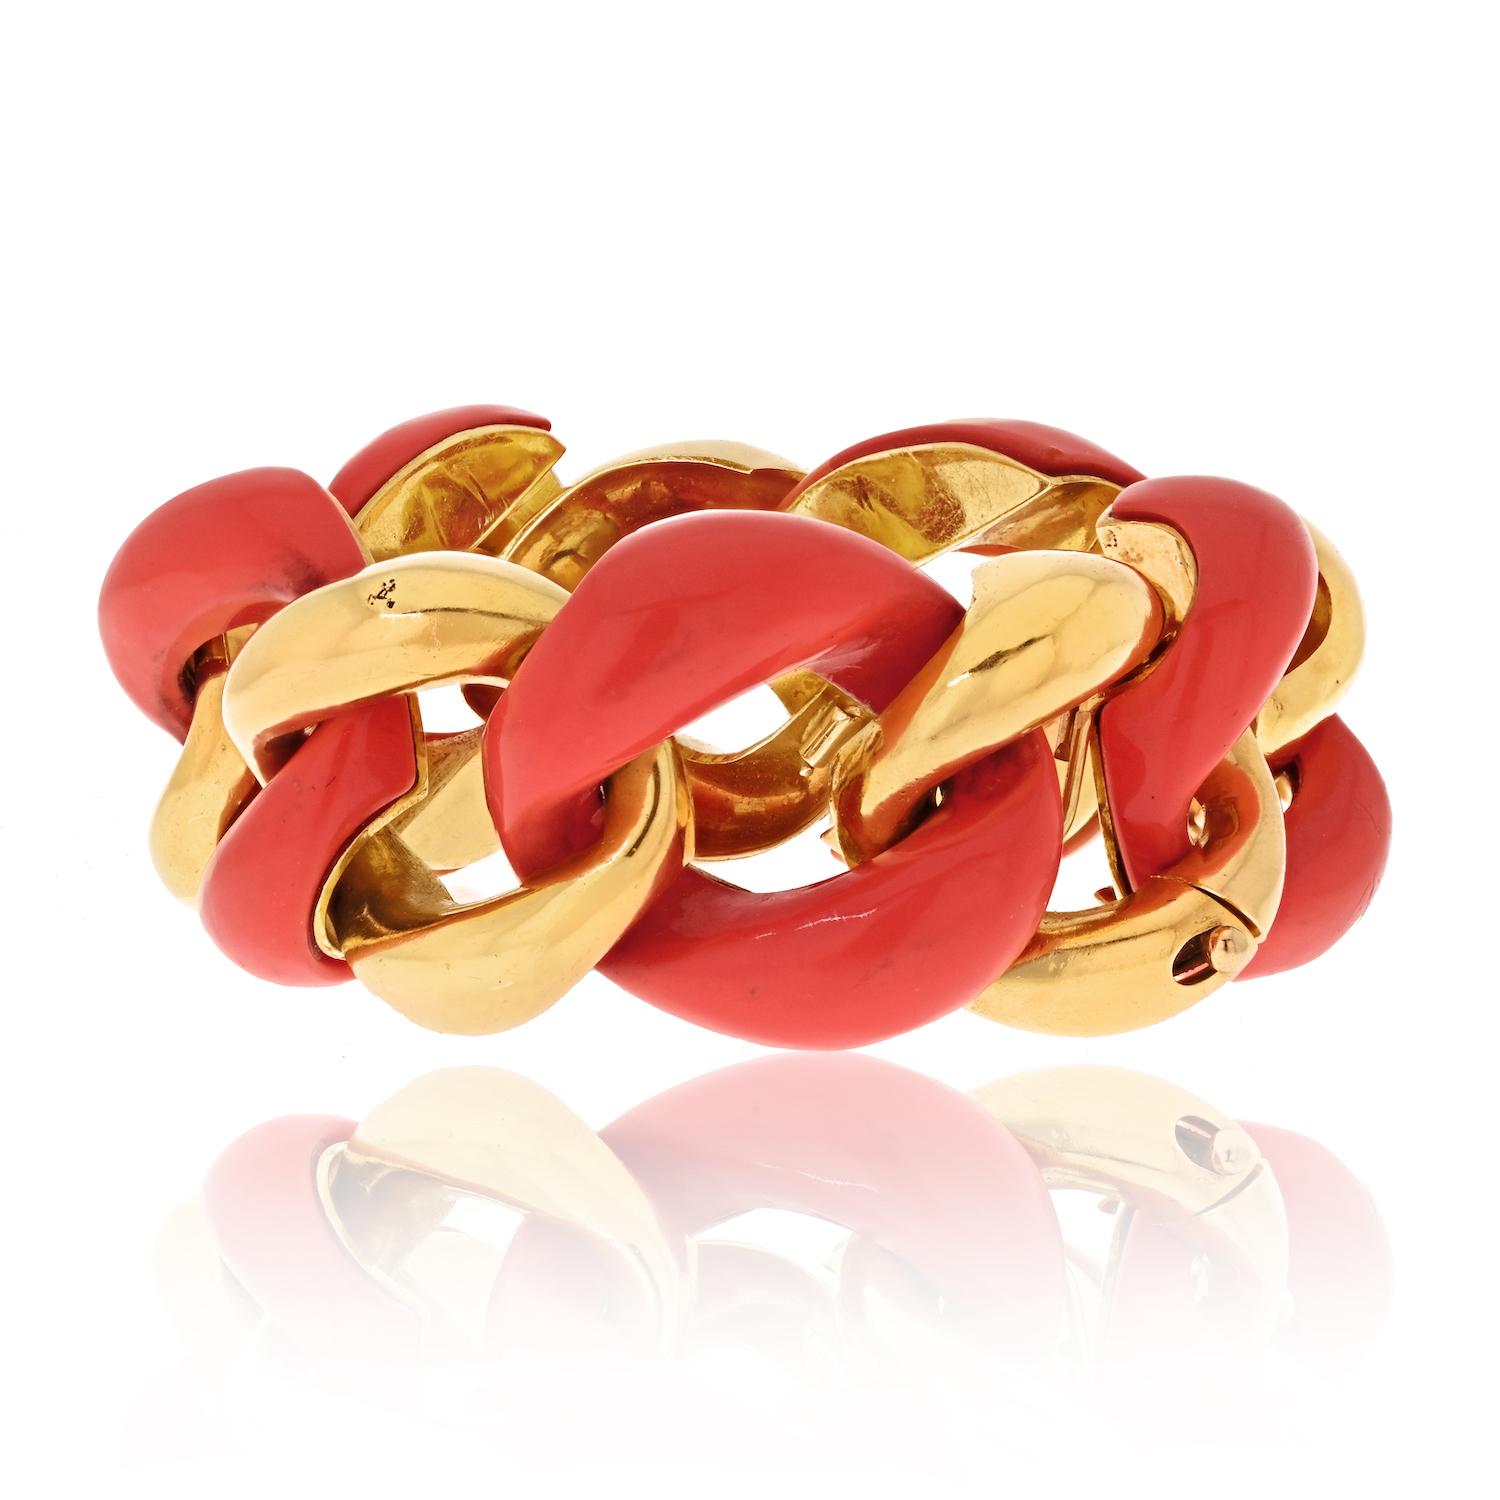 Seaman Schepps Coral And Gold Large Link Bracelet
Length: 7.75 inches. Crafted to be worn loose. 
Width: 25mm.

Seaman Schepps client list includes Coco Chanel, Elsa Schiaparelli, the Duchess of Windsor, and members of the Du Pont, Mellon and